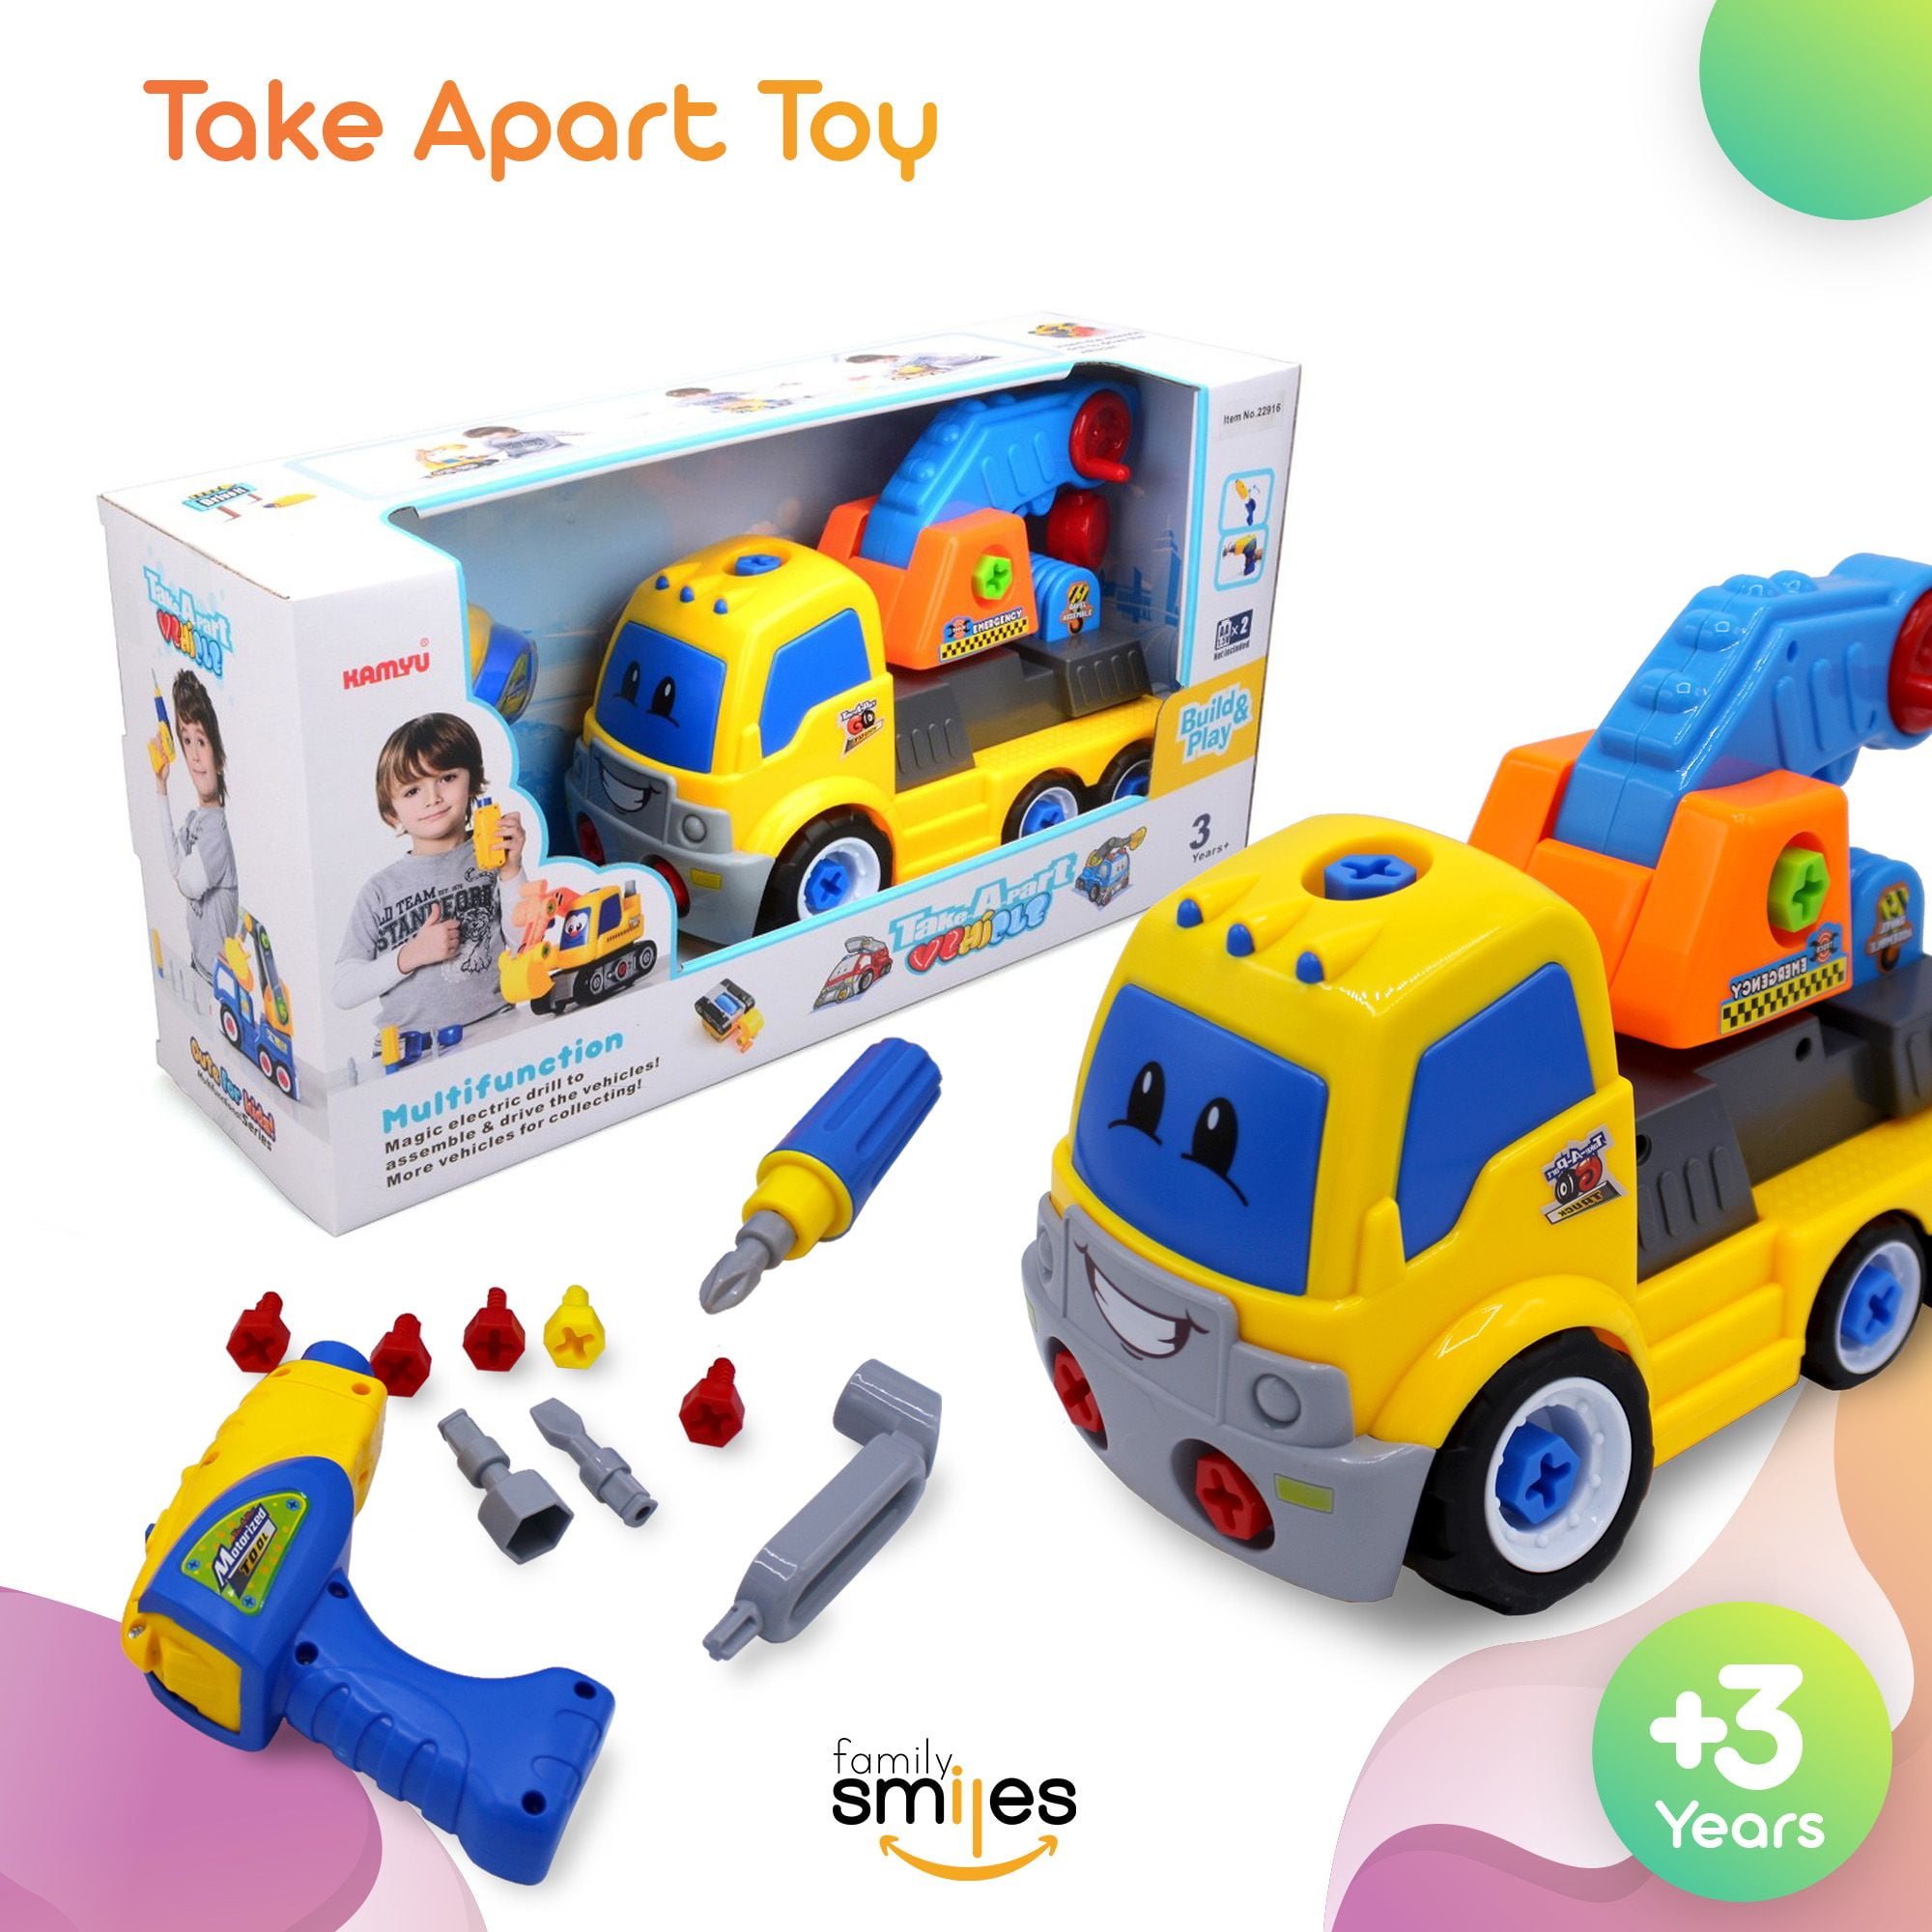 pull apart and put back together toys｜TikTok Search